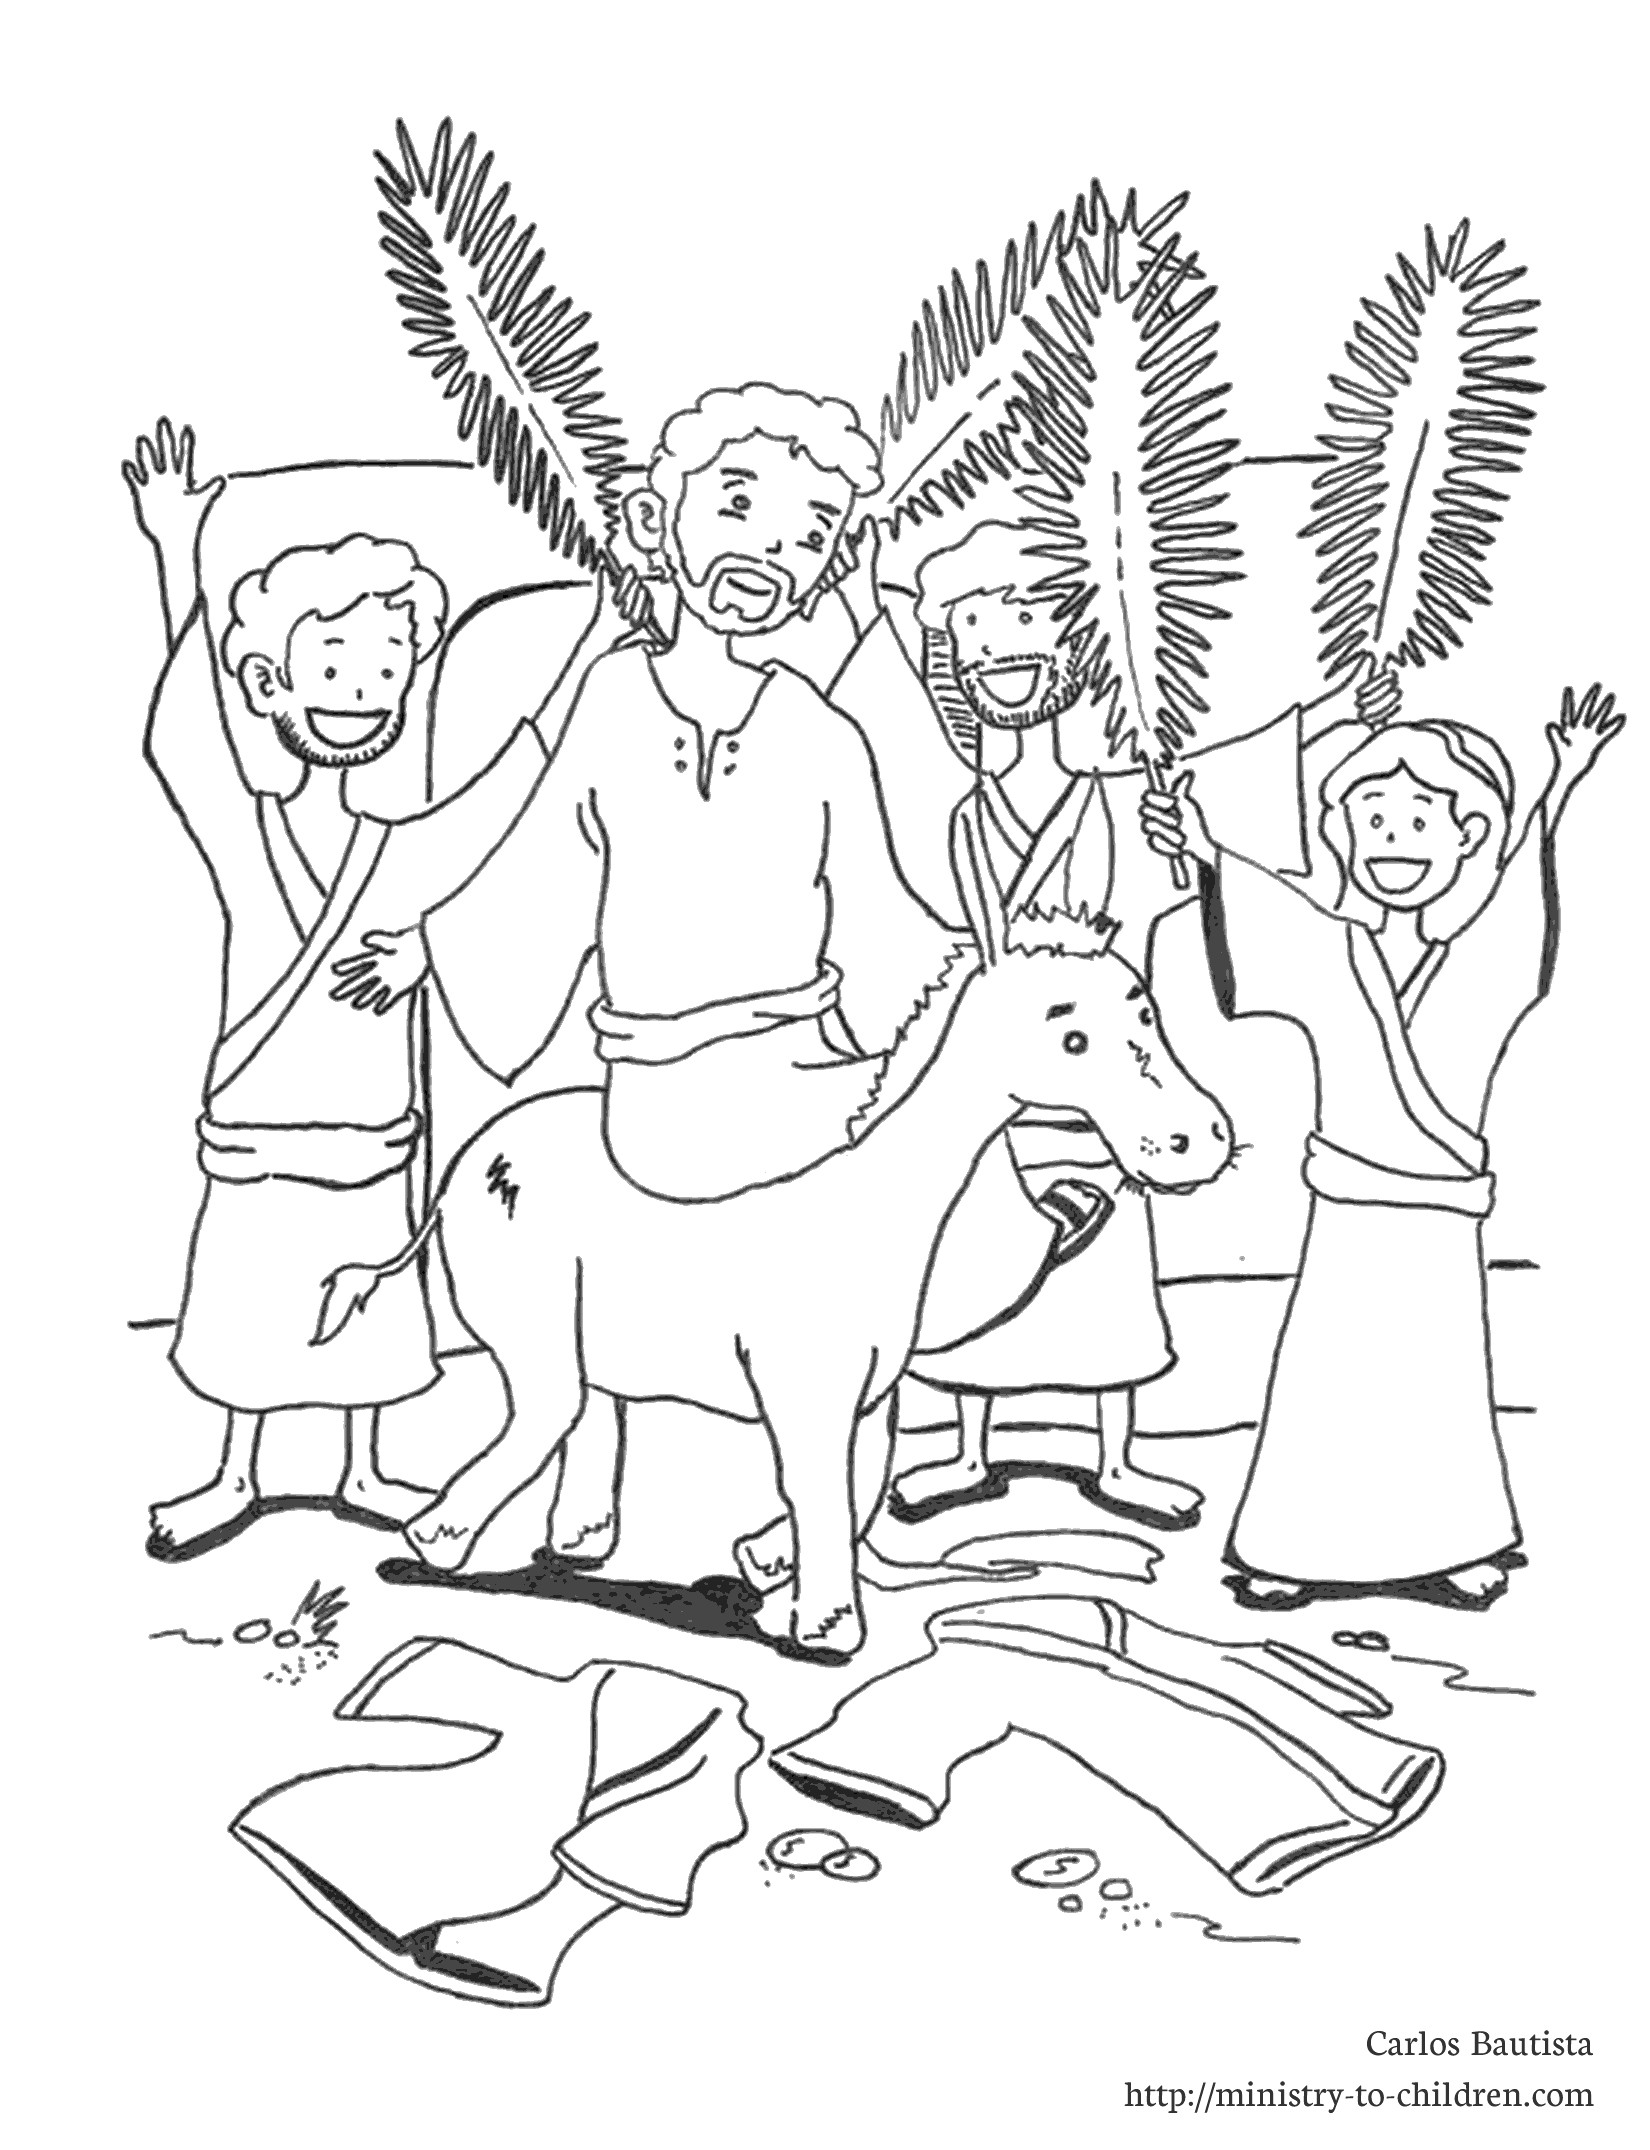 13-palm-sunday-coloring-page-to-print-print-color-craft